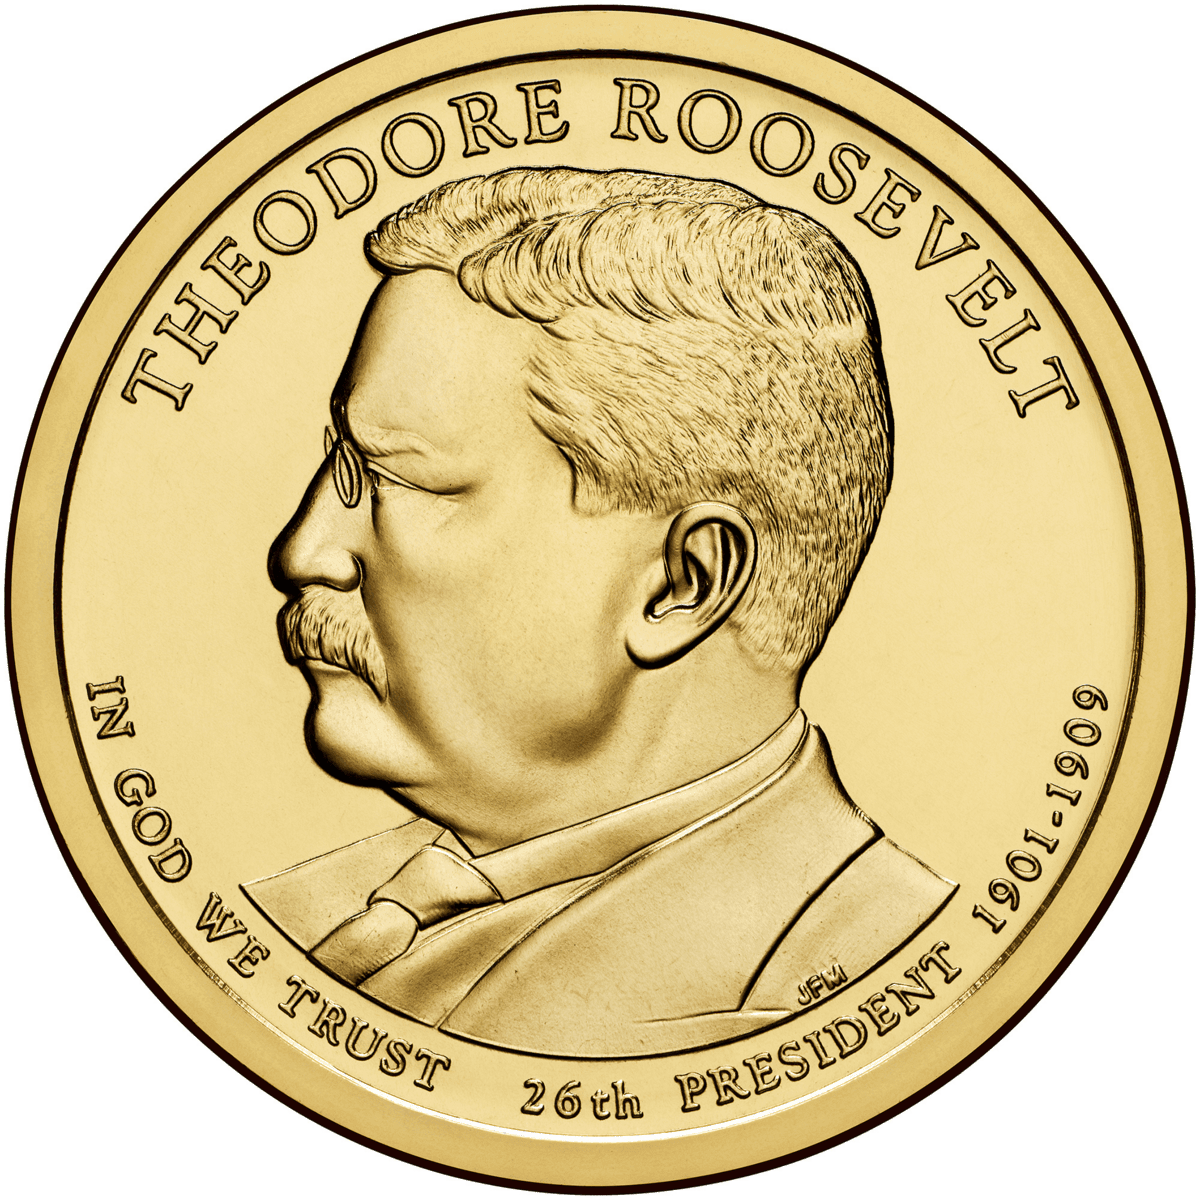 There is significant irony in how Theodore Roosevelt is memorialized in a coin inscribed "In God We Trust," after the former president voiced his opposition to placing such a "solemn sentence" on coinage. (Public Domain)